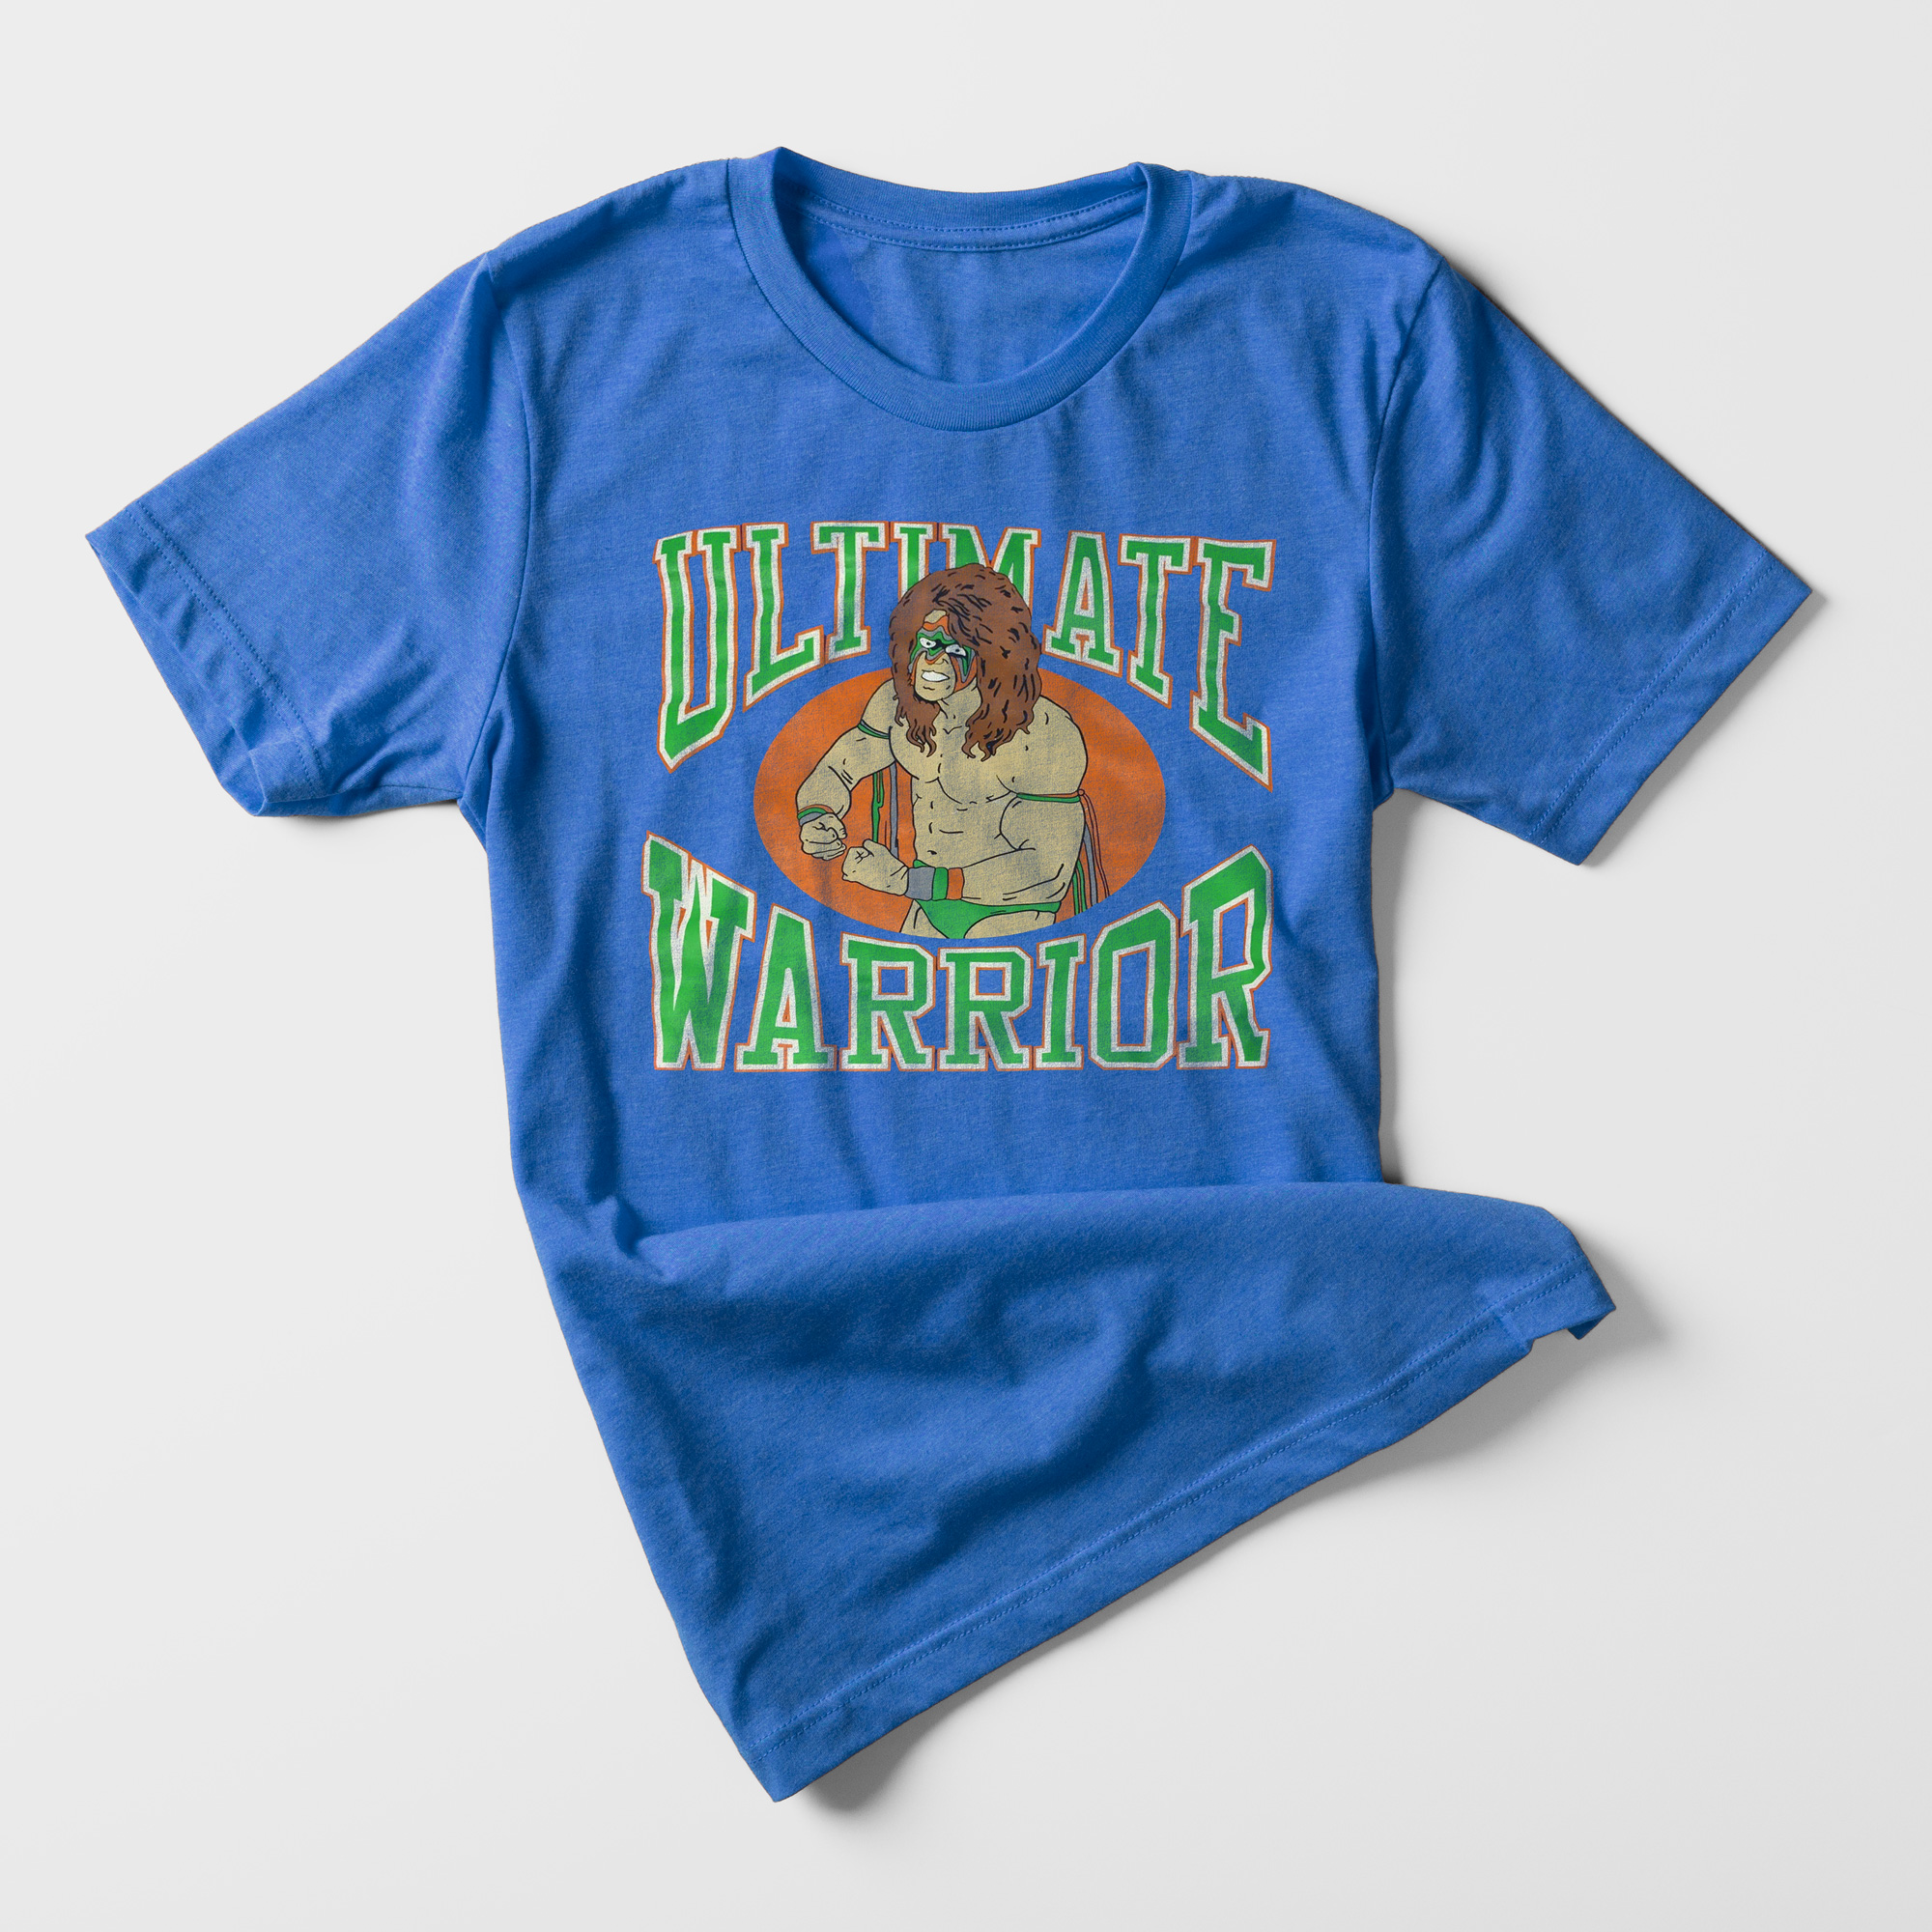 The Ultimate Warrior's t-shirt has a vintage feel and its blue fabric along with the vibrant illustration of the wrestler exemplifies his image. 